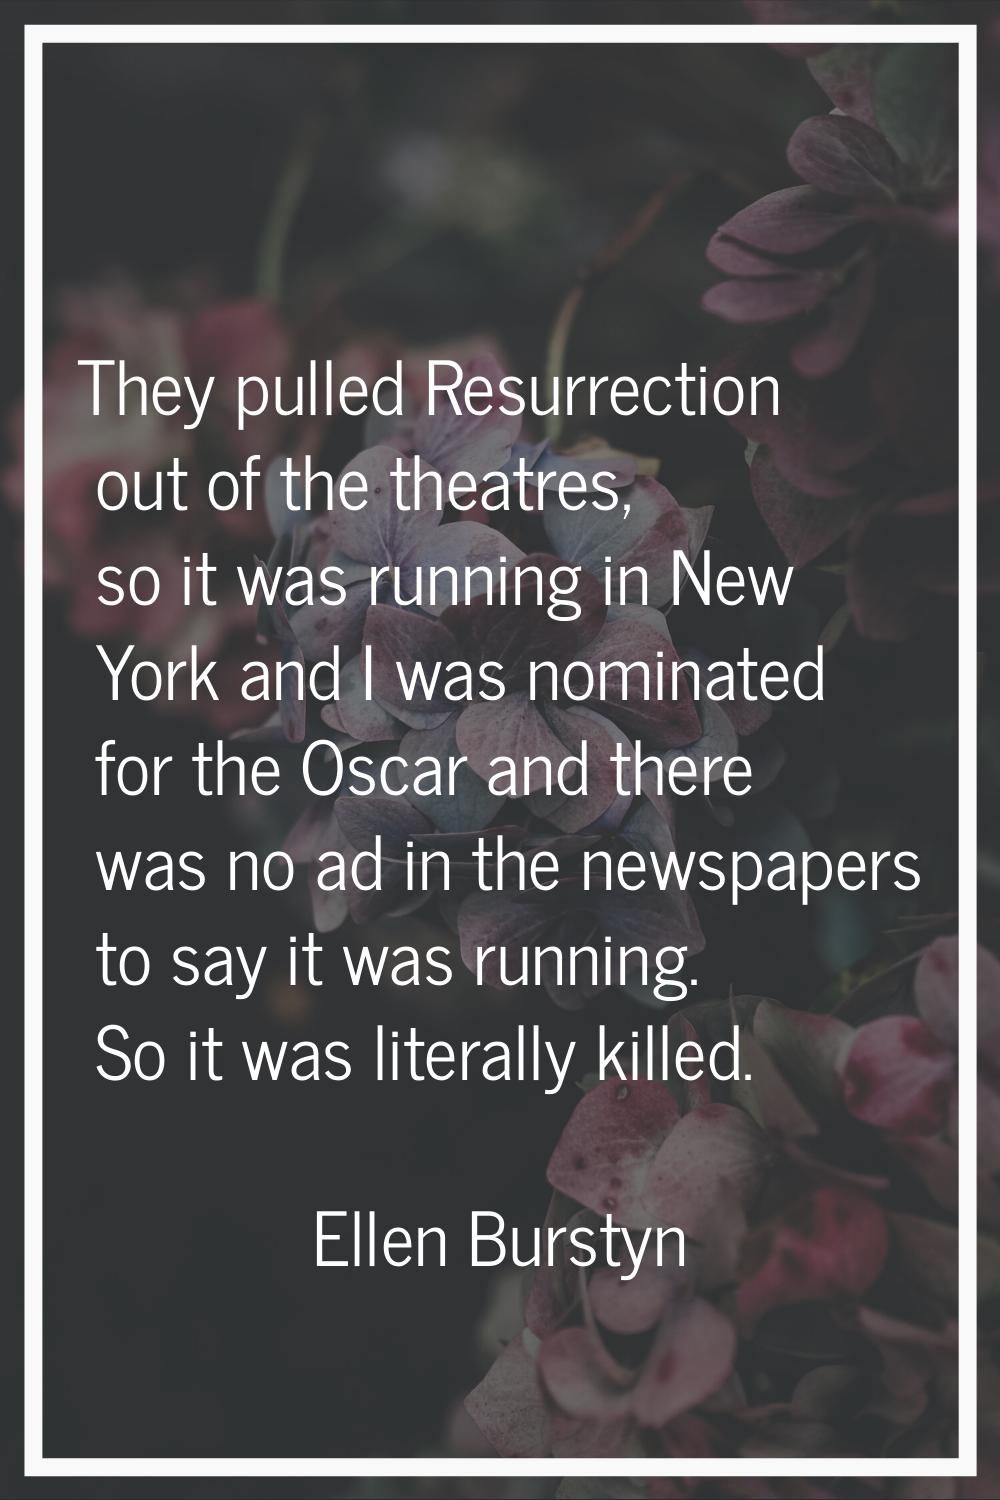 They pulled Resurrection out of the theatres, so it was running in New York and I was nominated for